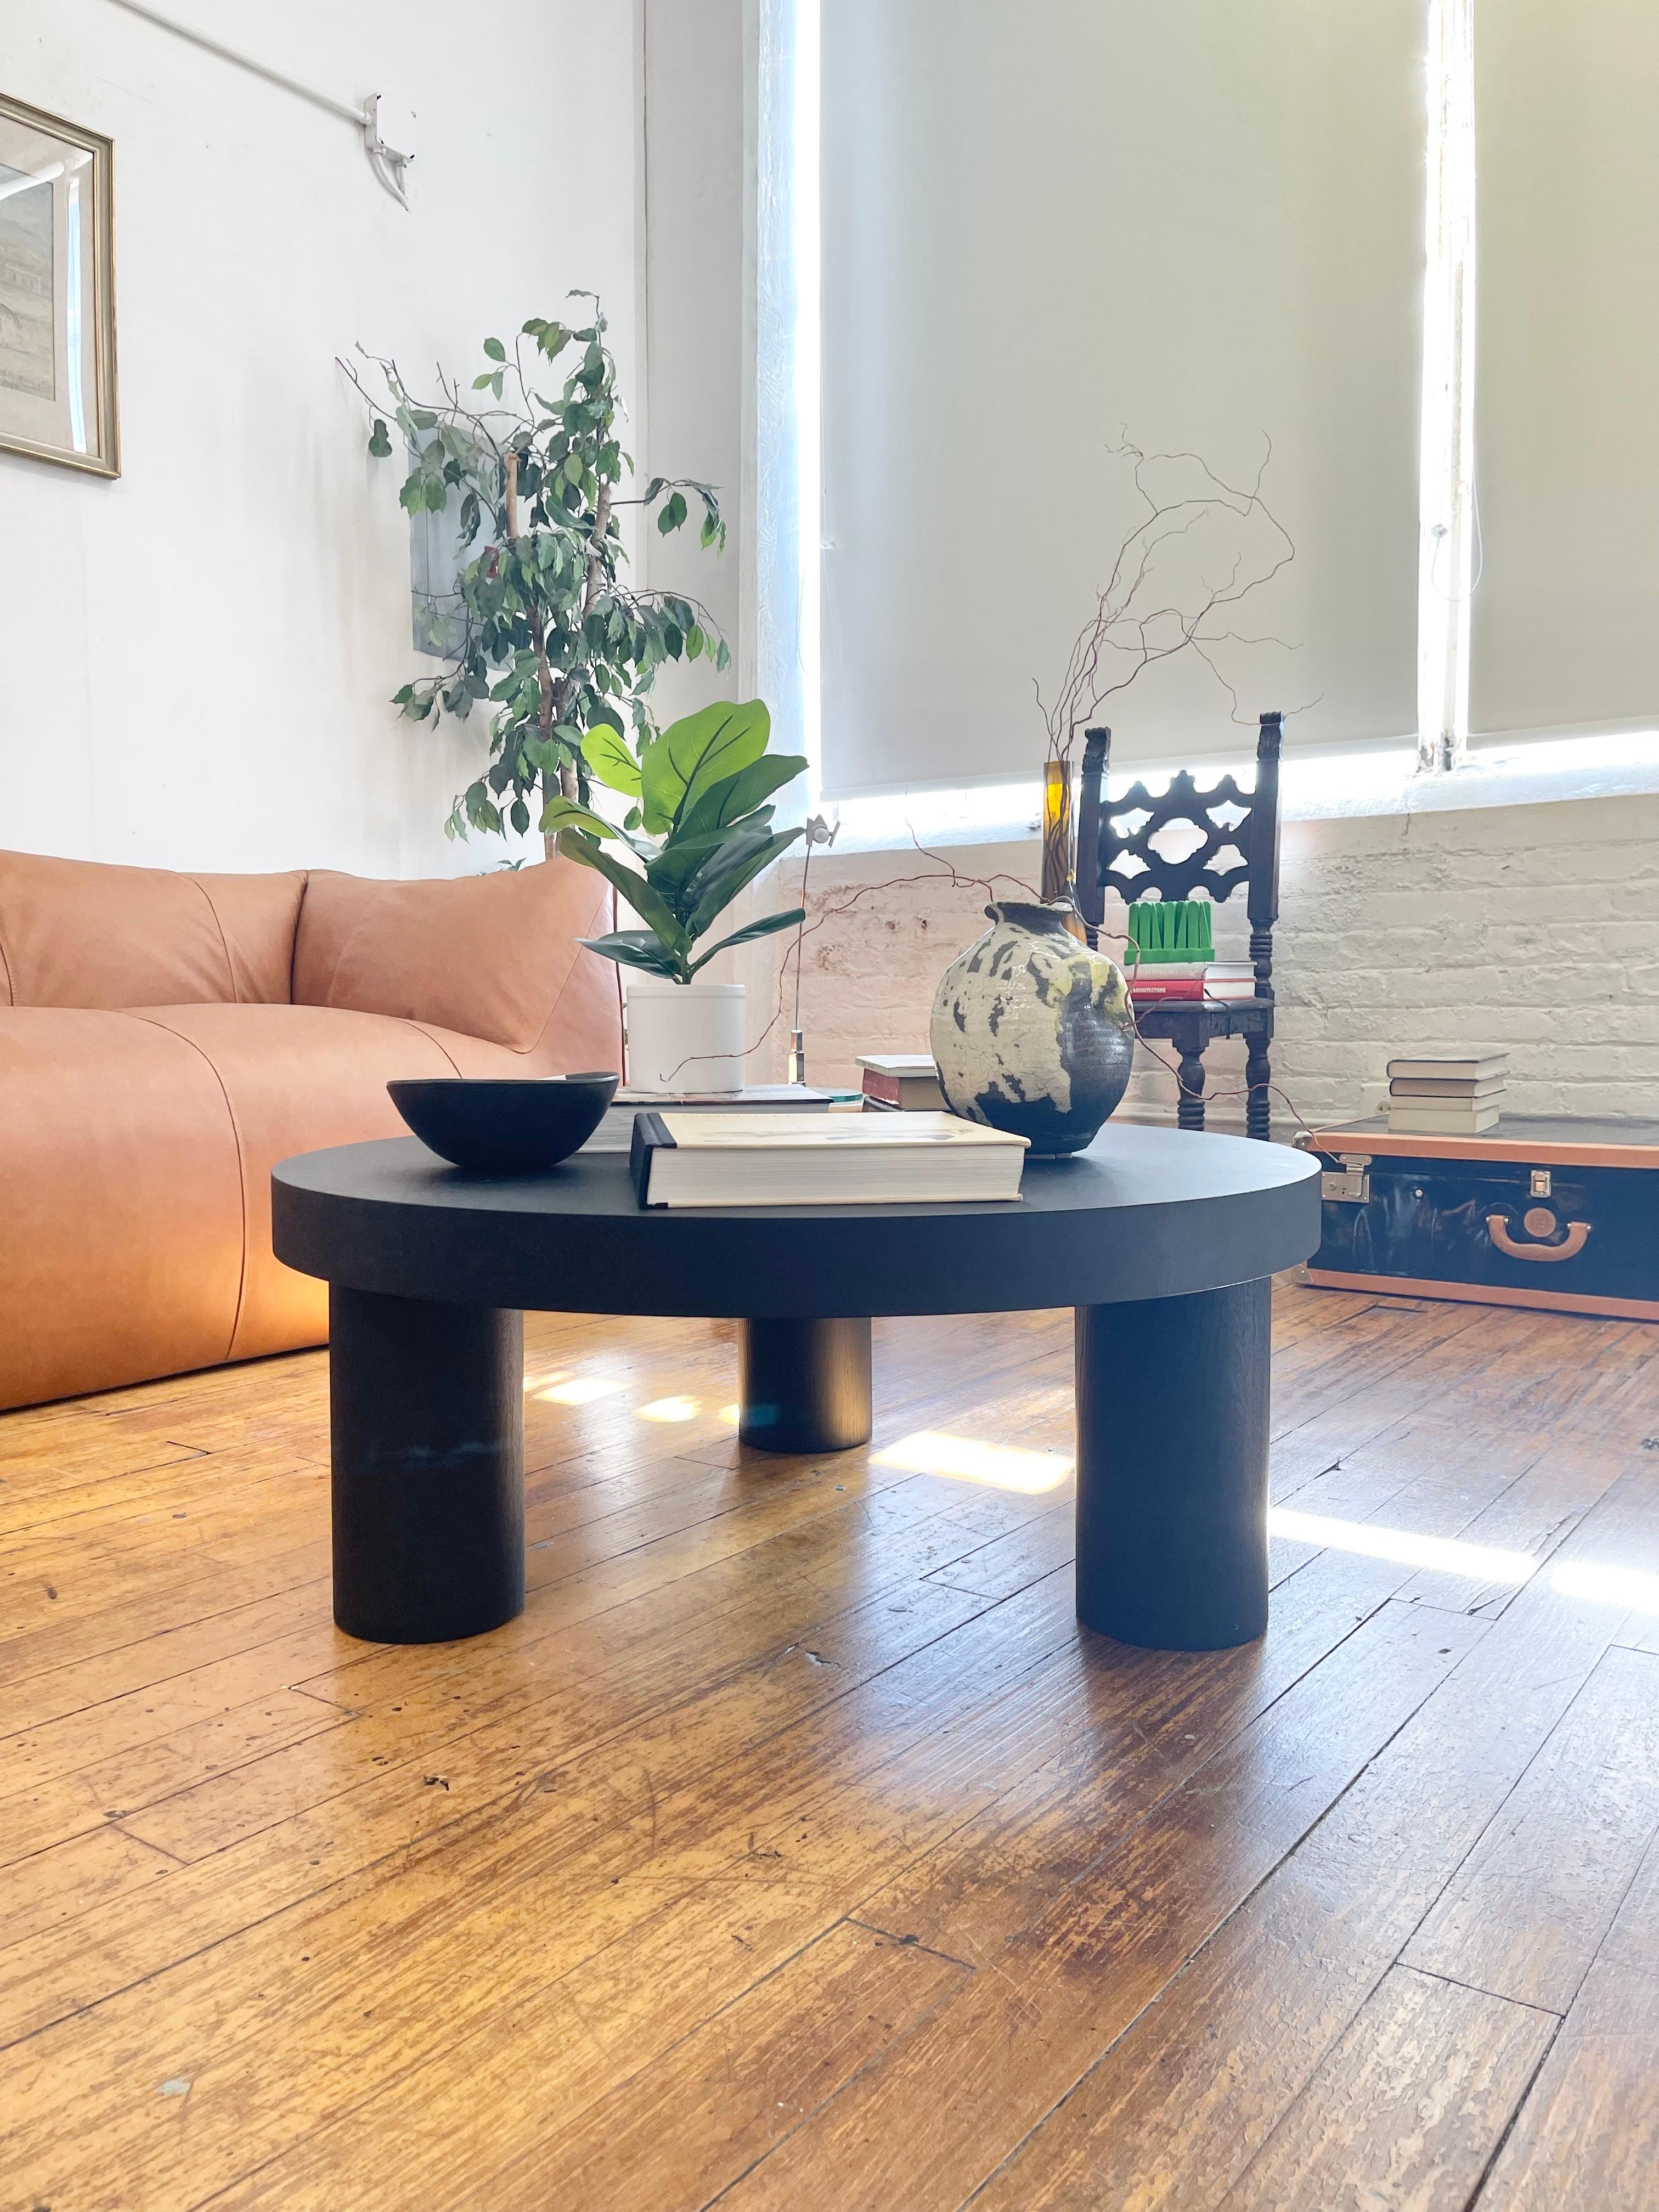 Introducing a truly remarkable vintage find, the monumental three-legged cubist coffee table. Sourced from an important estate in Connecticut, this exceptional piece showcases impeccable design, possibly attributed to the renowned designer Holly